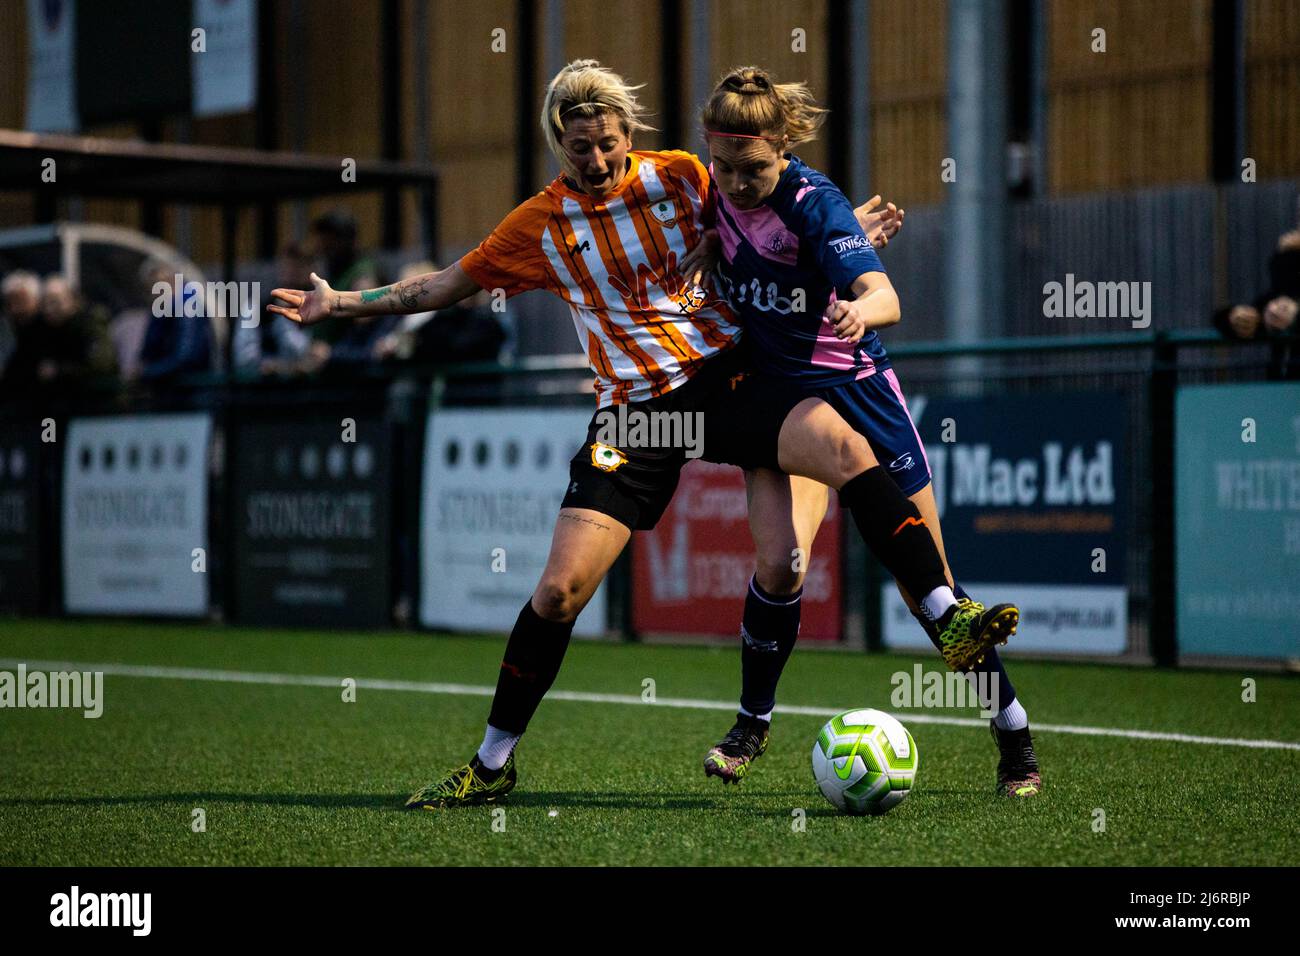 London, England. 03/05/2022, Jade Johnson (11 Ashford) and Asia Harbour Brown (18 Dulwich Hamlet) in action during the Capital Womens Senior Cup game between Ashford (Middlesex) and Dulwich Hamlet at Meadowbank in London, England.  Liam Asman/SPP Stock Photo